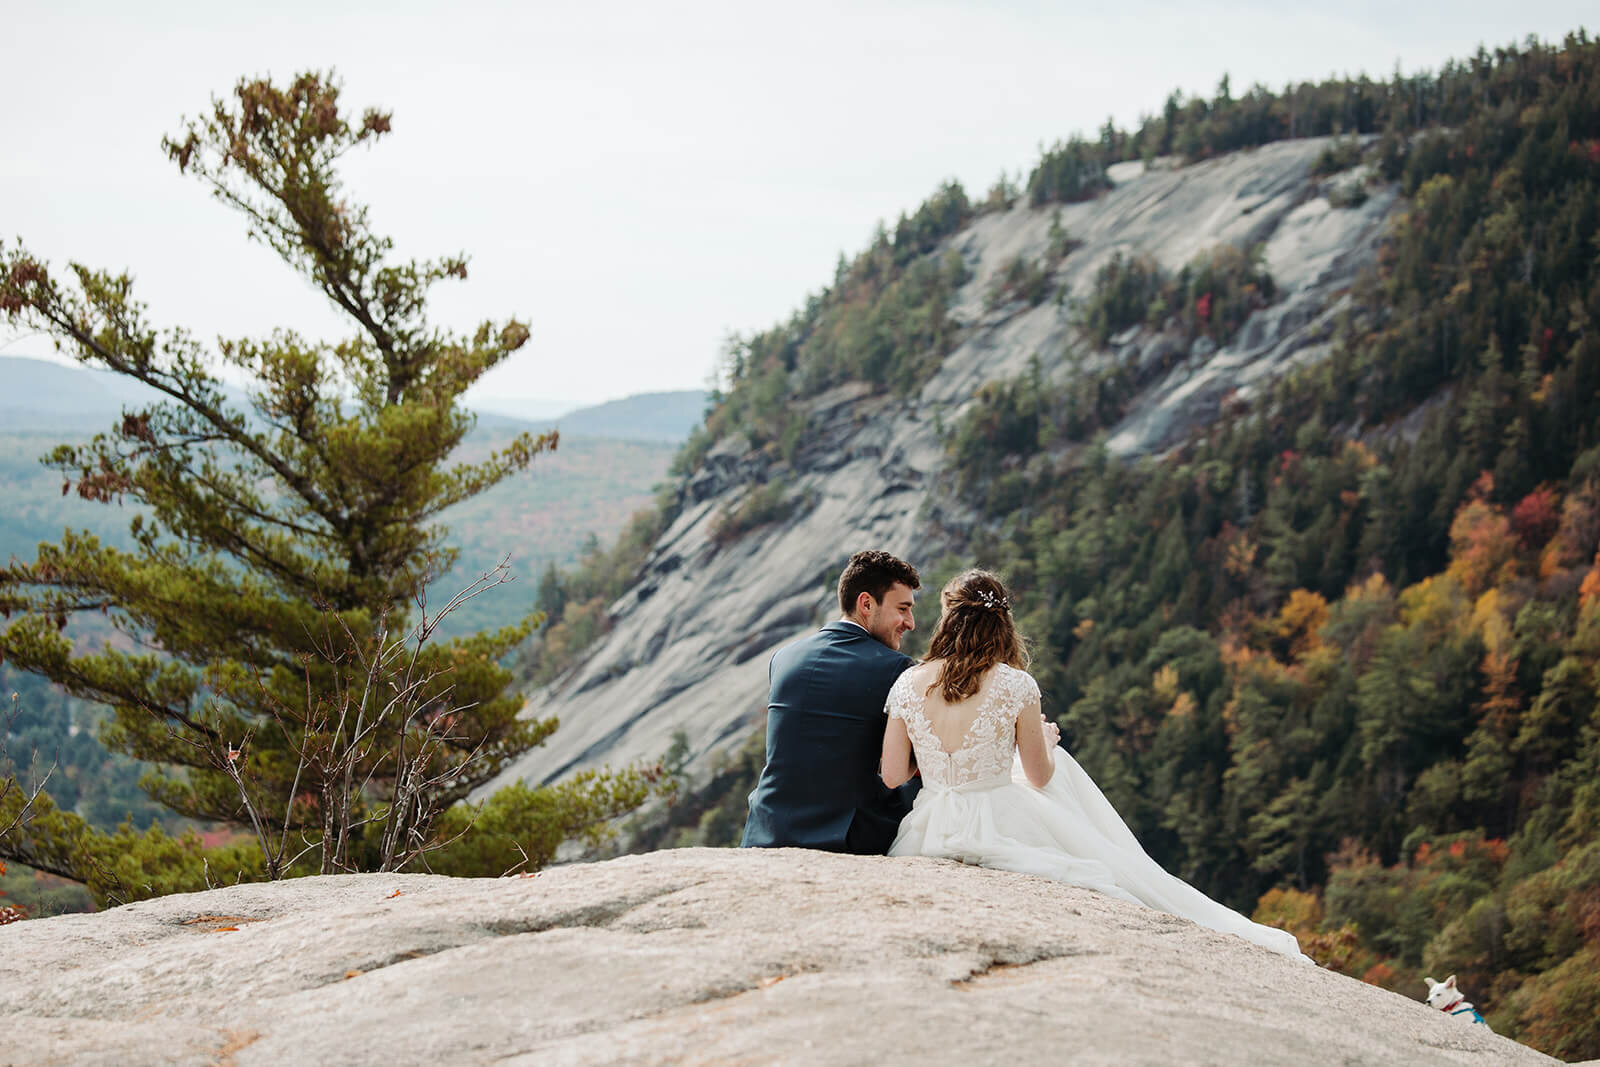  The couple steals a quiet moment after their elopement ceremony to take in the view in the White Mountains in New Hampshire. New Hampshire elopement 